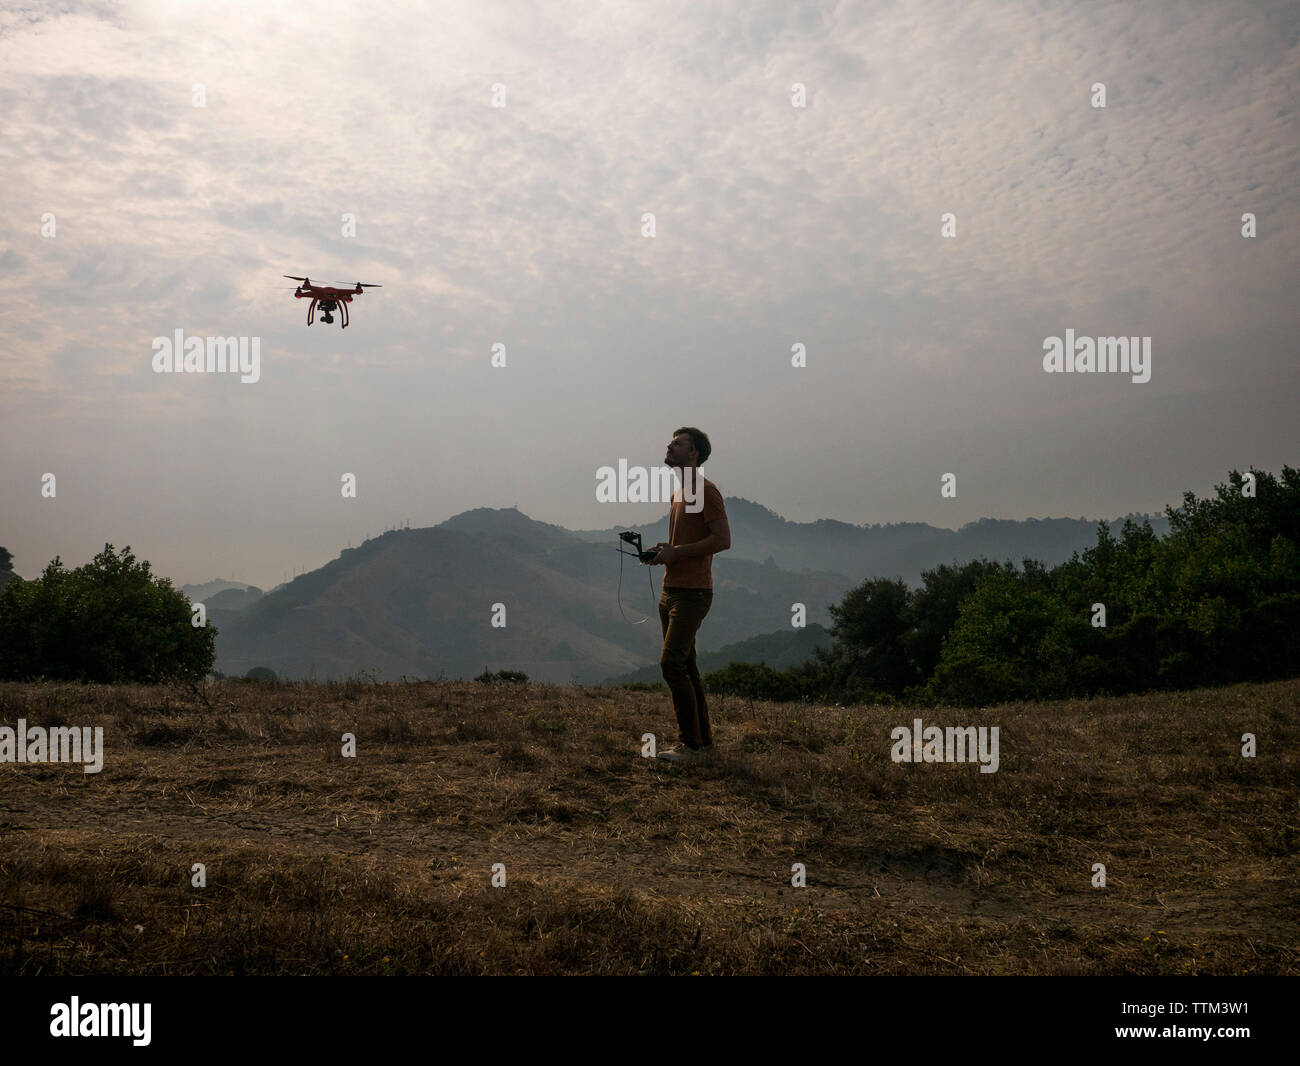 Side view of man operating drone through remote control against mountains Stock Photo